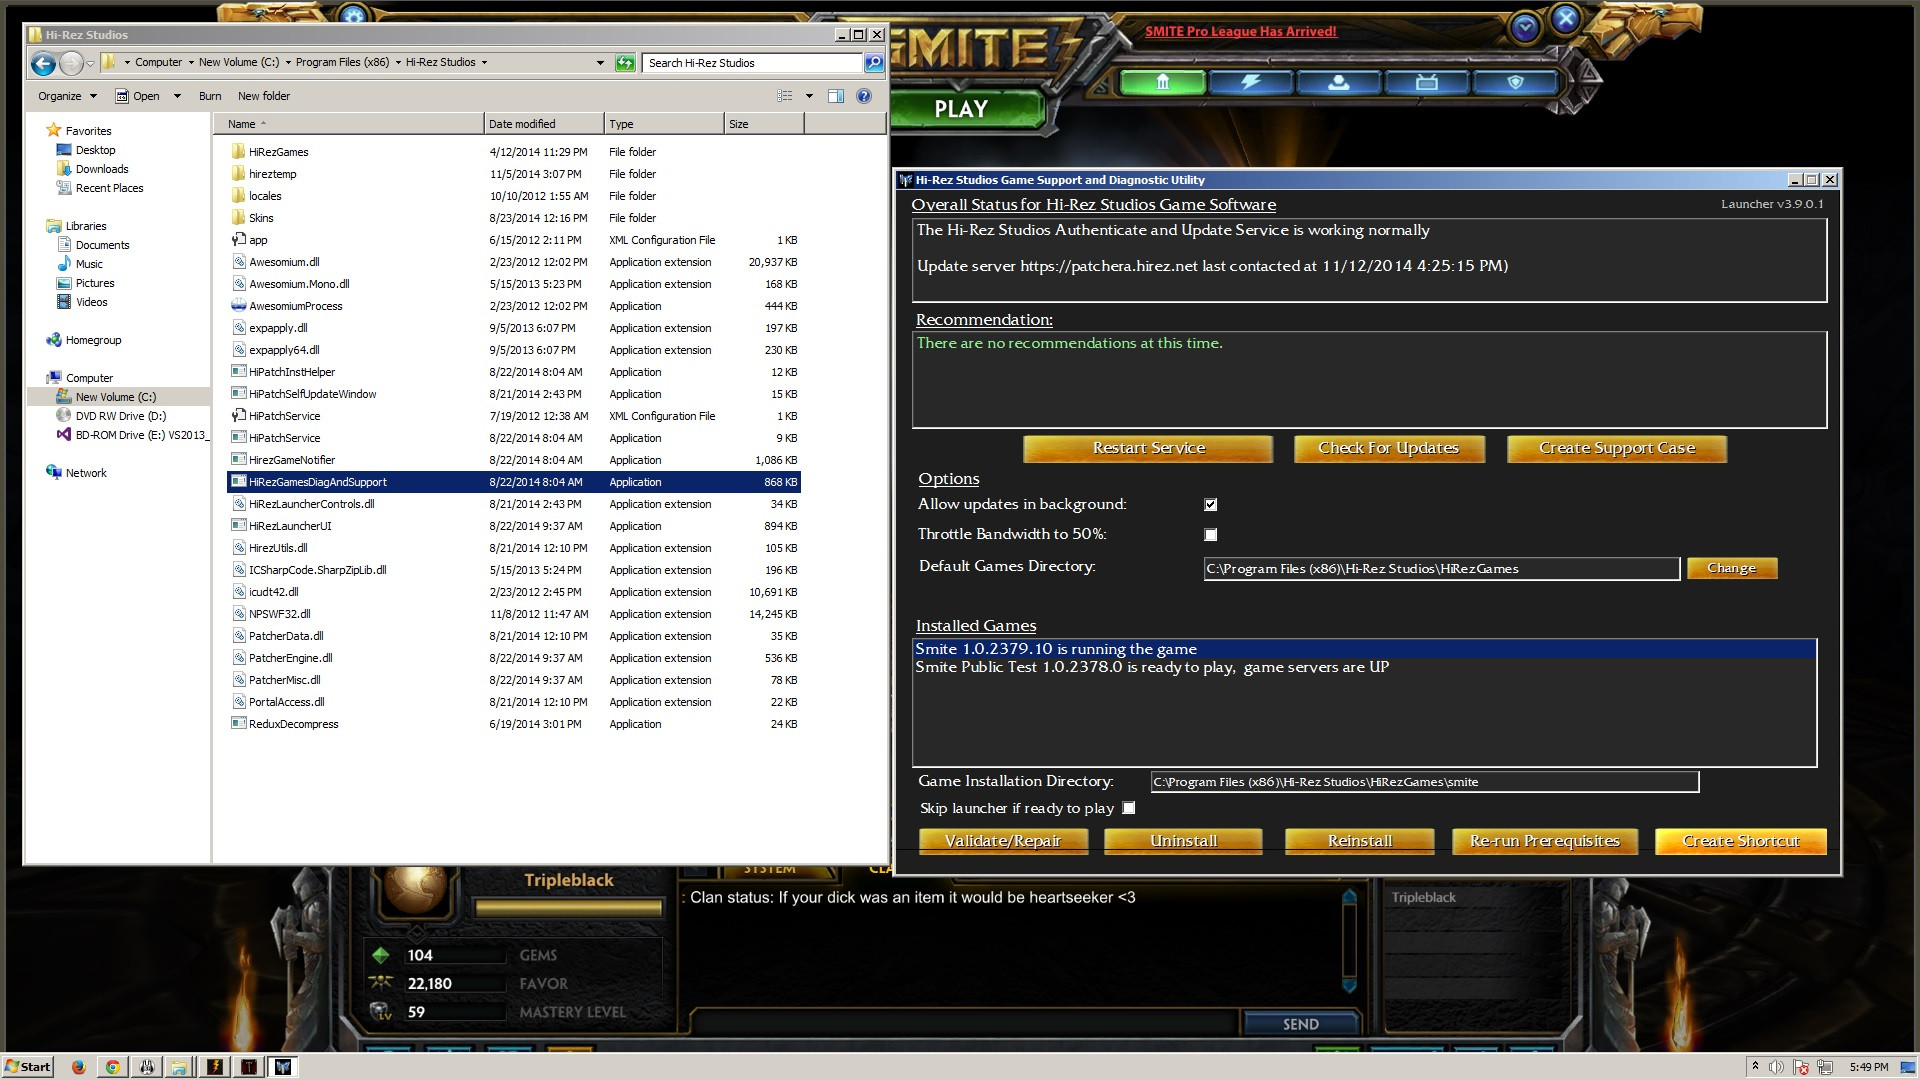 Locate the Smite shortcut on your desktop or in the Start menu.
Right-click on the shortcut and select Properties.